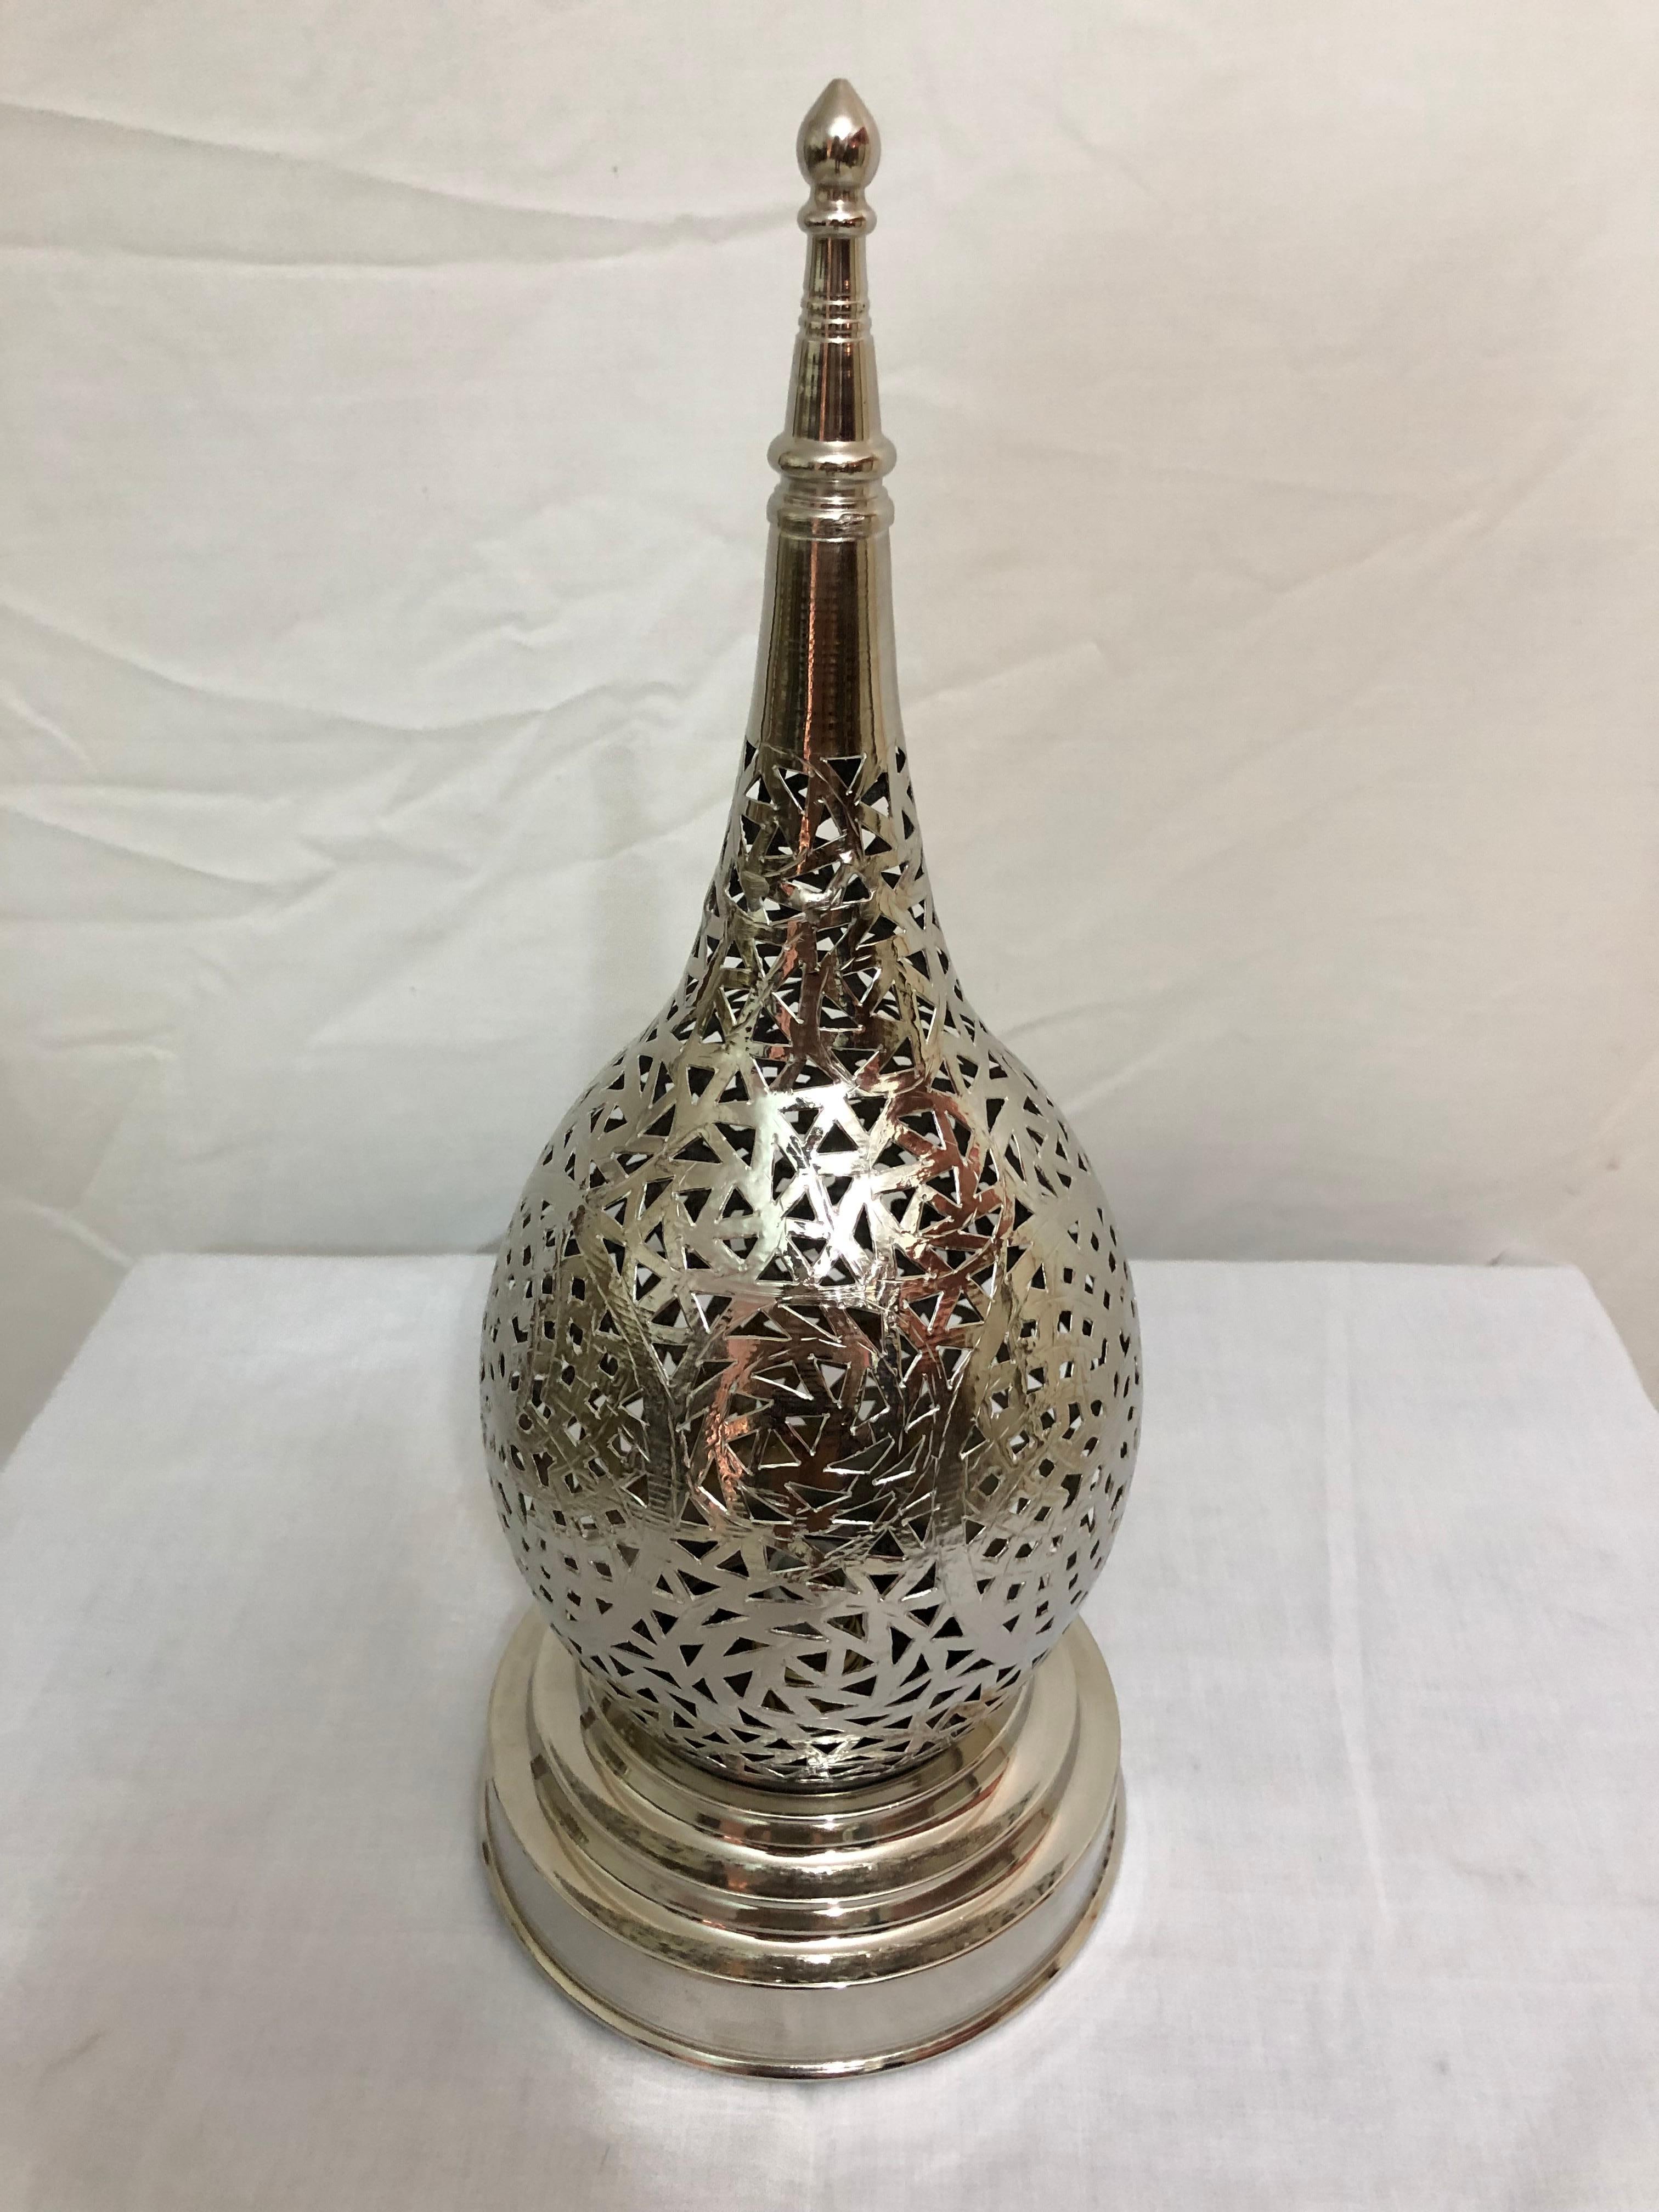 The intricate filigree design work of this handcrafted brass tear-shaped lamp will elevate the ambiance of any room. Featuring a wonderfully unique design aesthetic, this table lamp emits a soft, filtered light.

Dimensions: 6